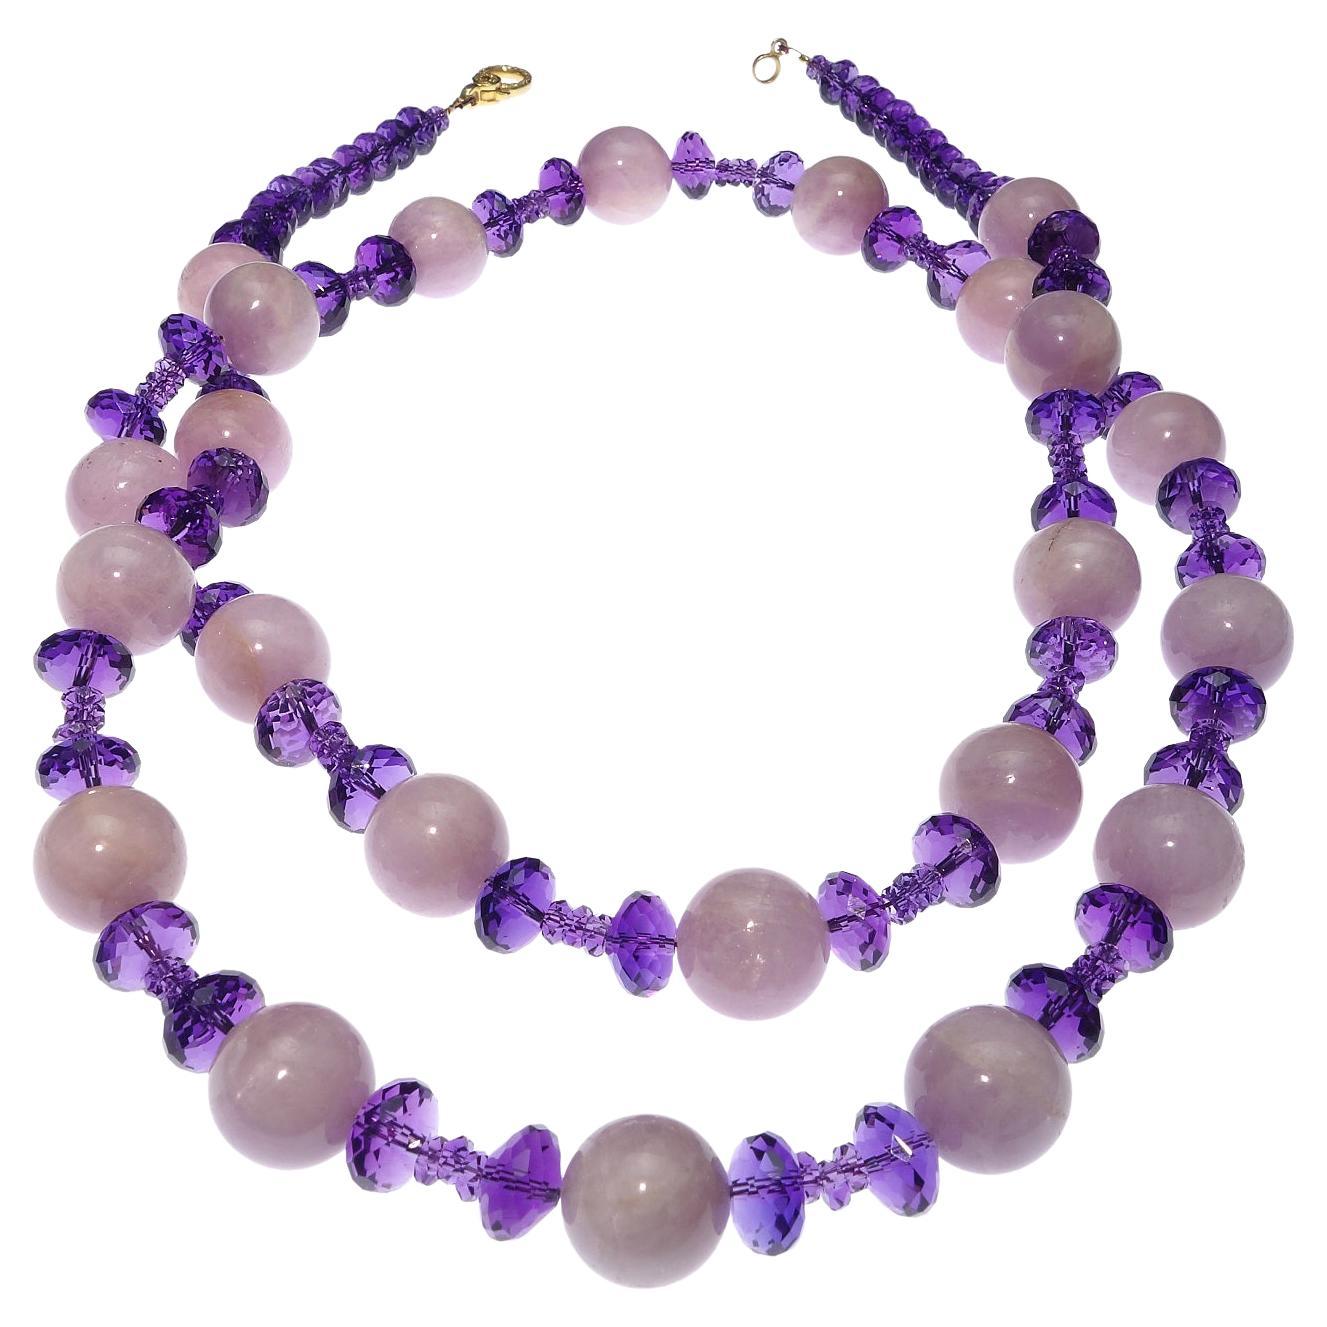 Handmade necklace of Sparkling Amethyst rondelles and glowing spheres of Kunzite.  This unique 35 inch long necklace commands your attention.  Wear it long or wrap it once.  The two sizes of glittering faceted Amethysts dance in the light and play